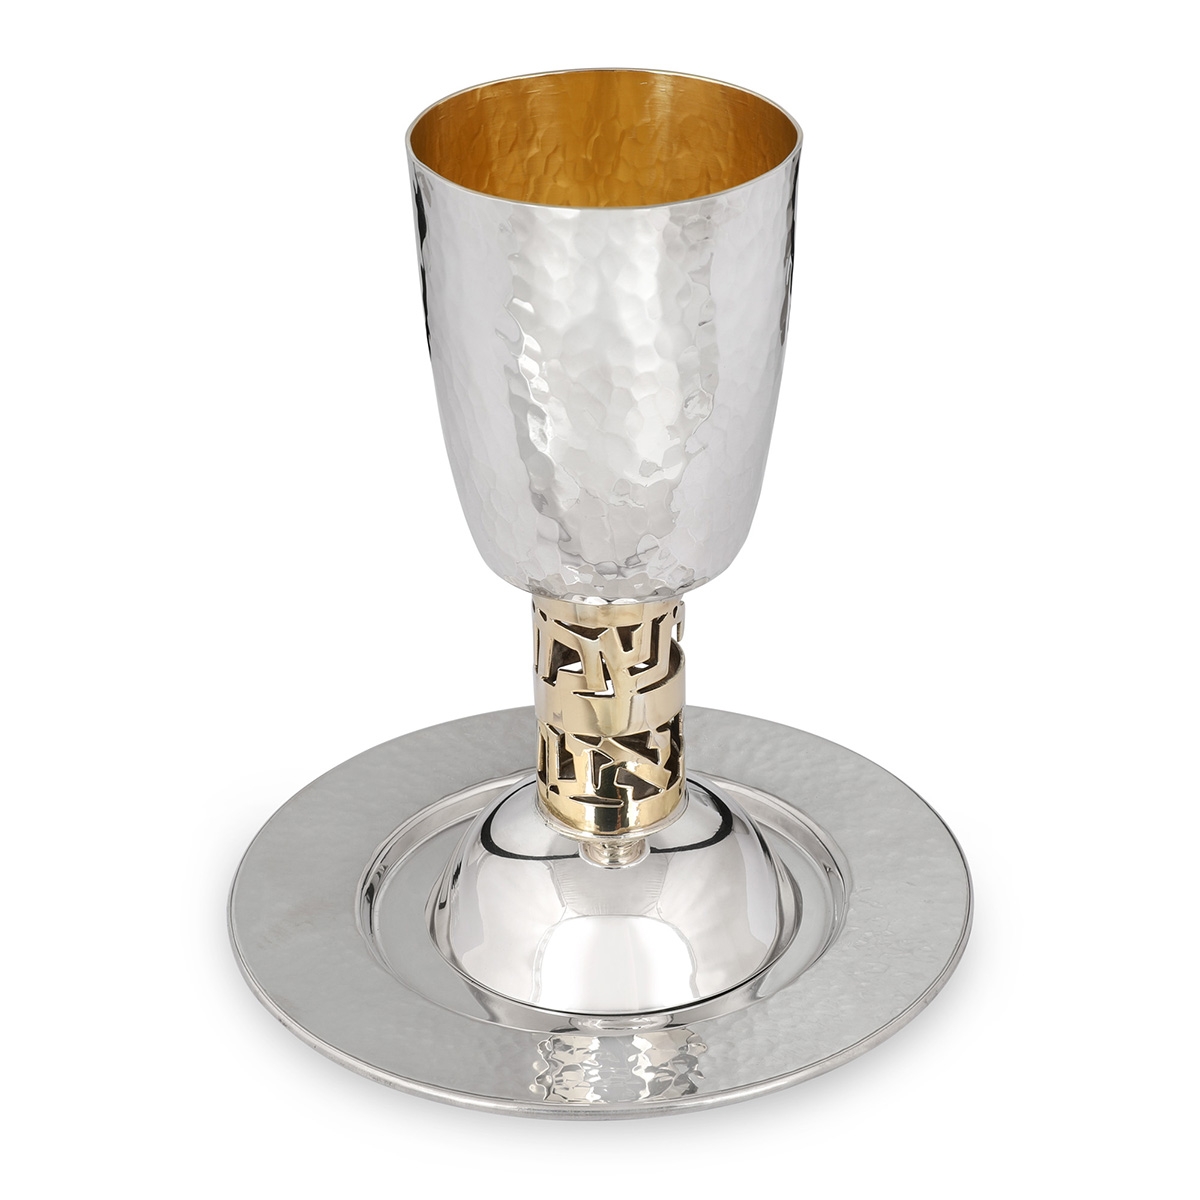 Bier Judaica Large Handcrafted Sterling Silver Kiddush Cup With Psalms Verse - 1